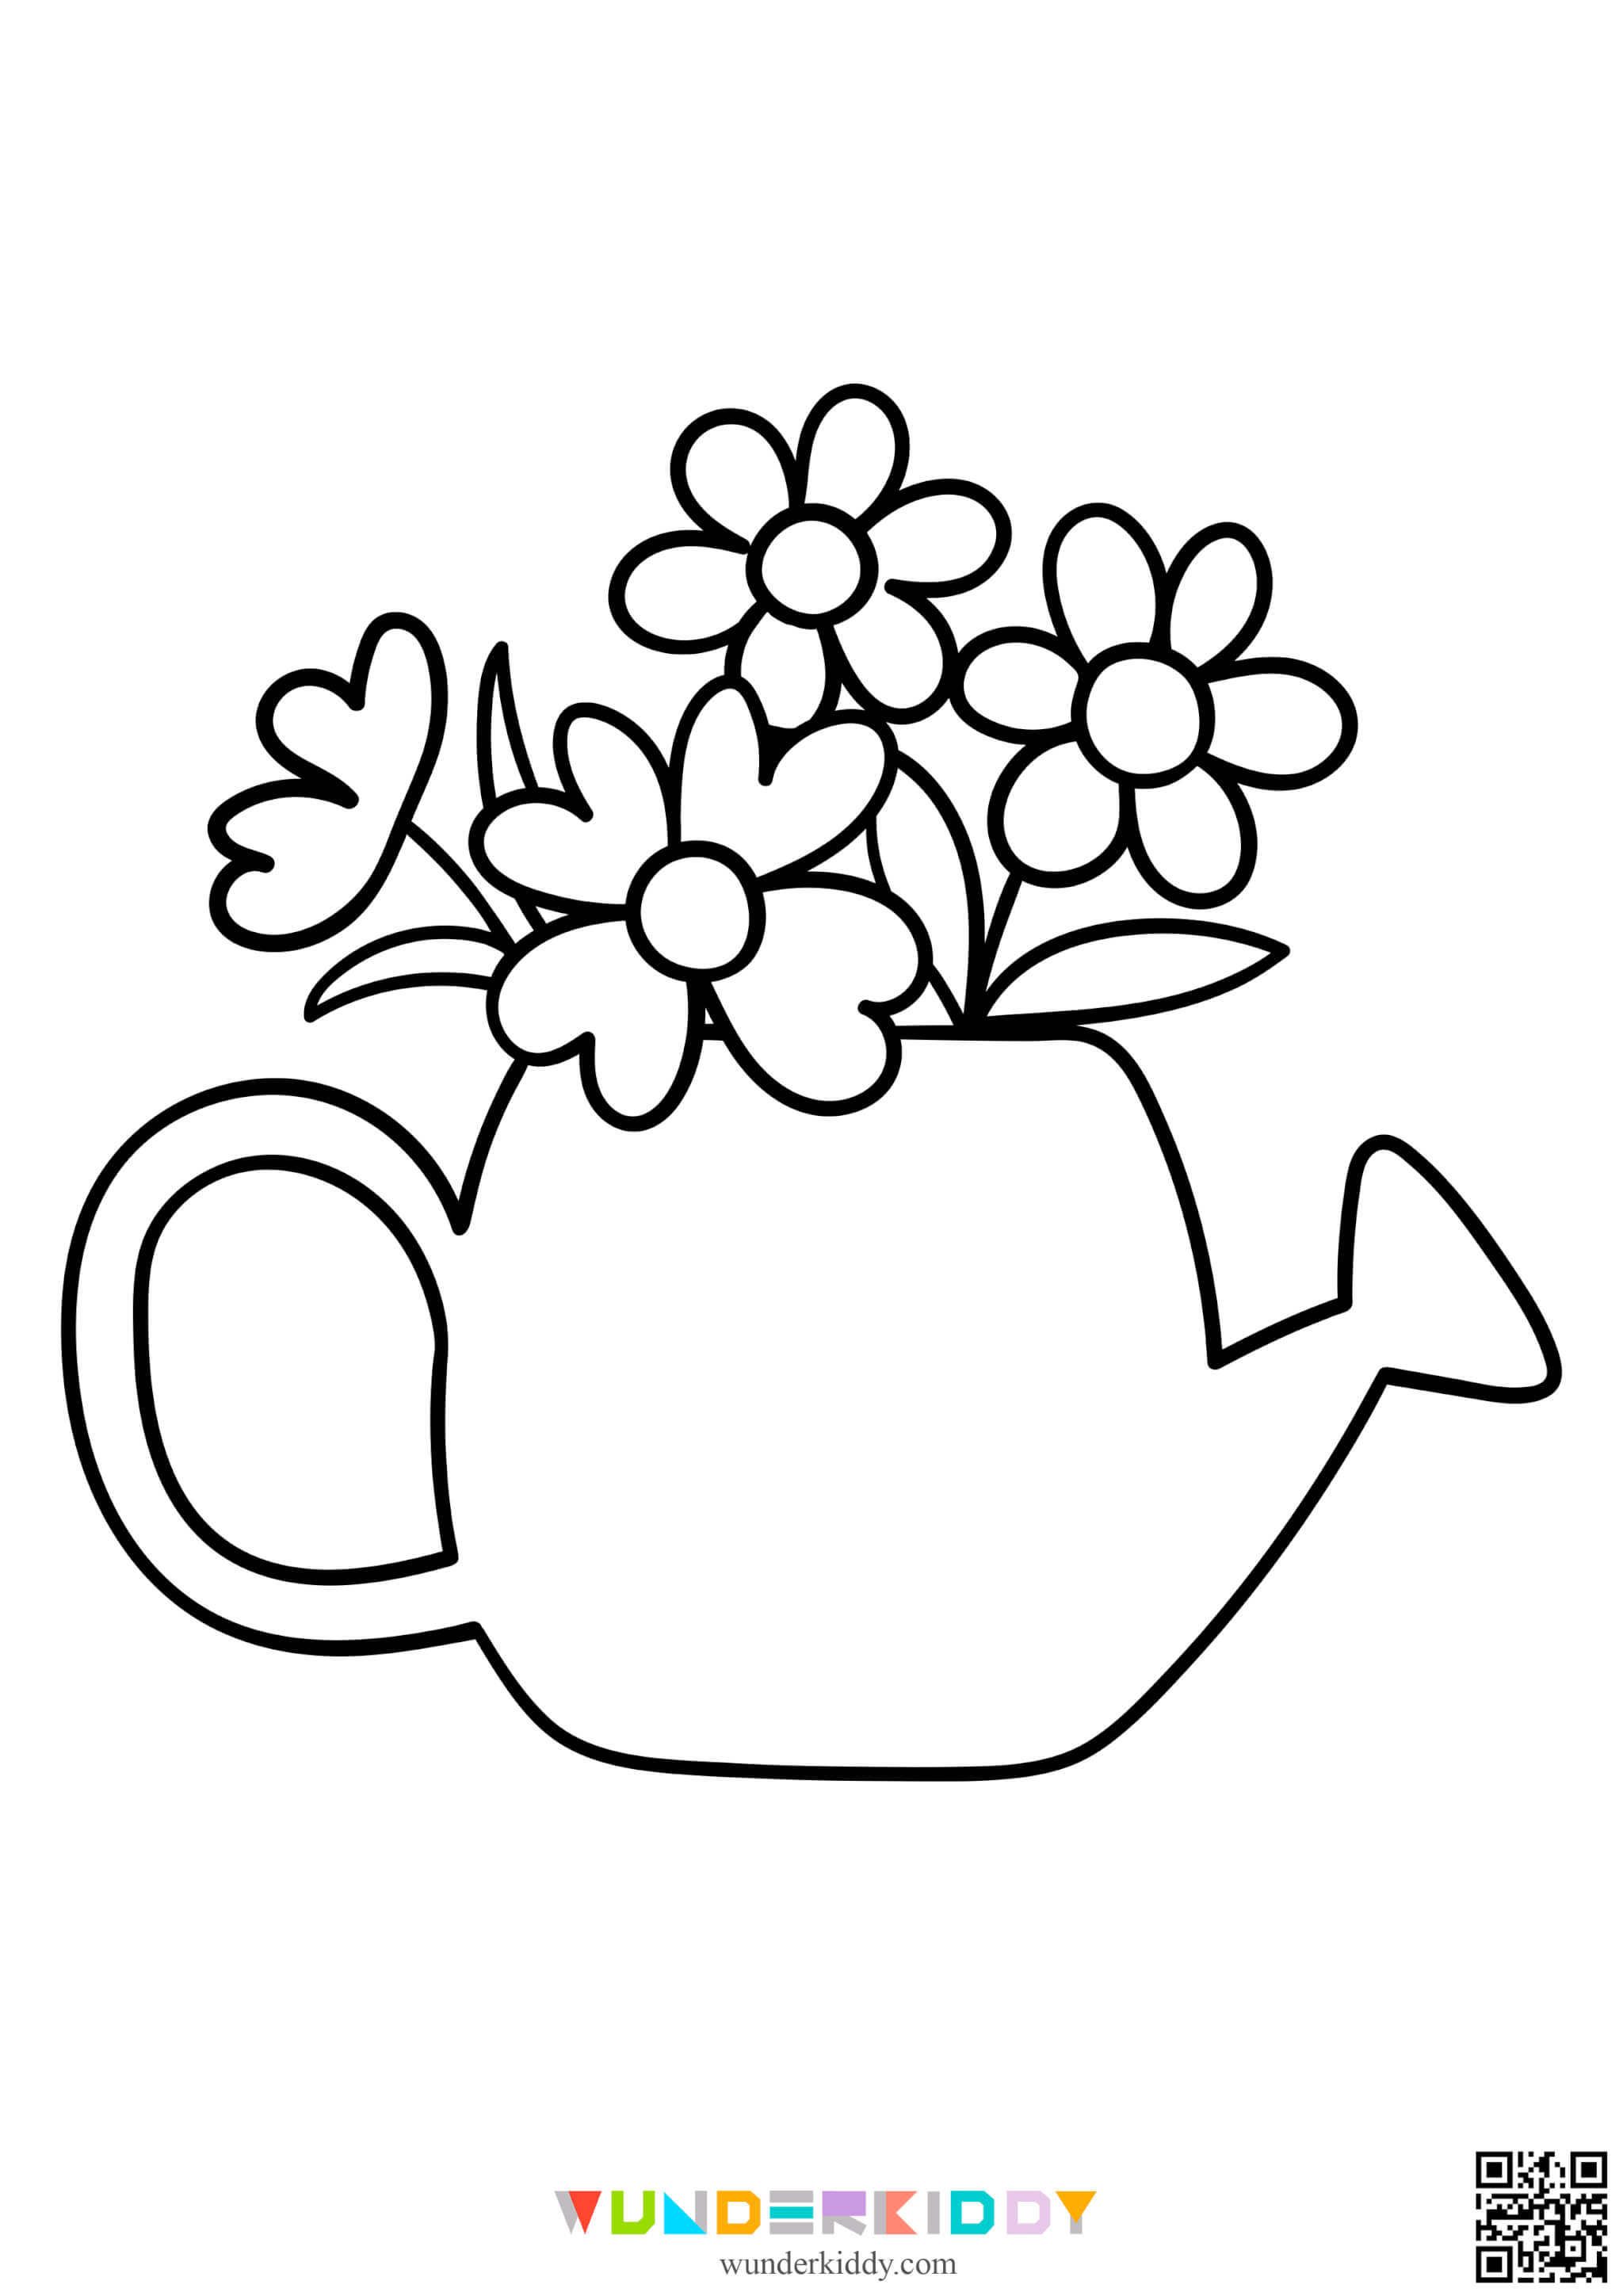 Spring Coloring Pages - Image 10